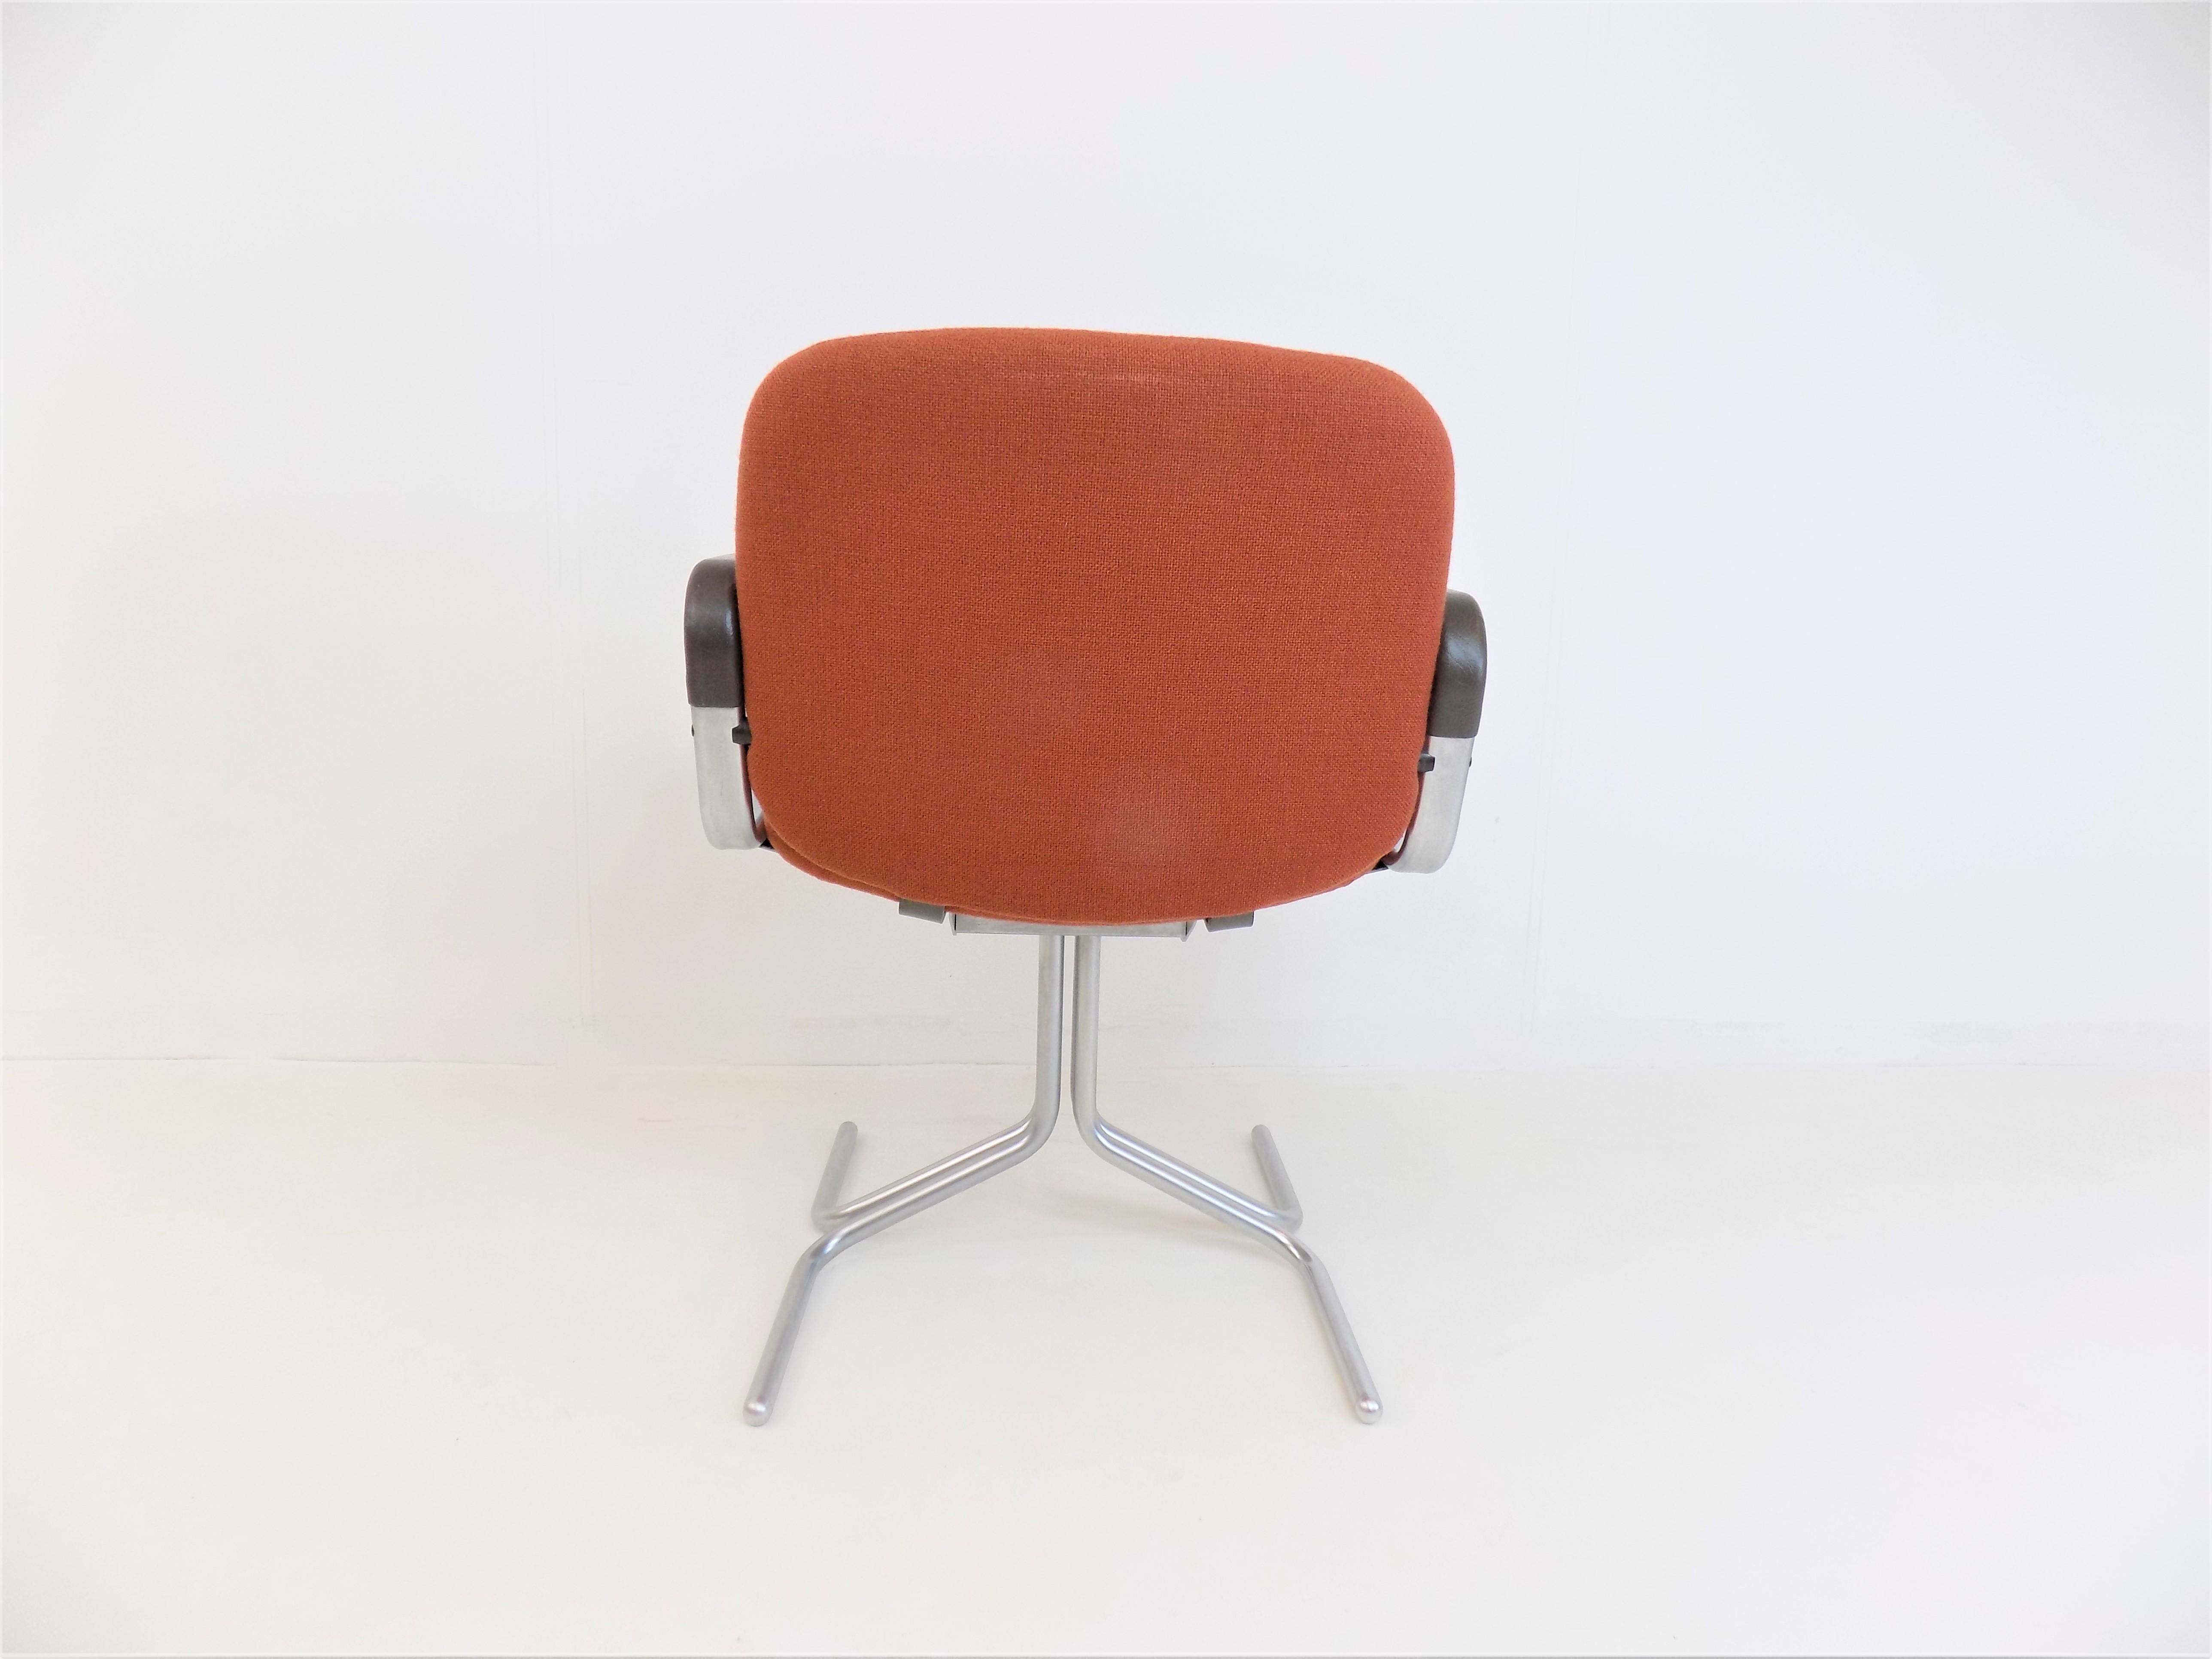 Space Age Mauser Seat 150 Dining/Conference Chair by Herbert Hirche